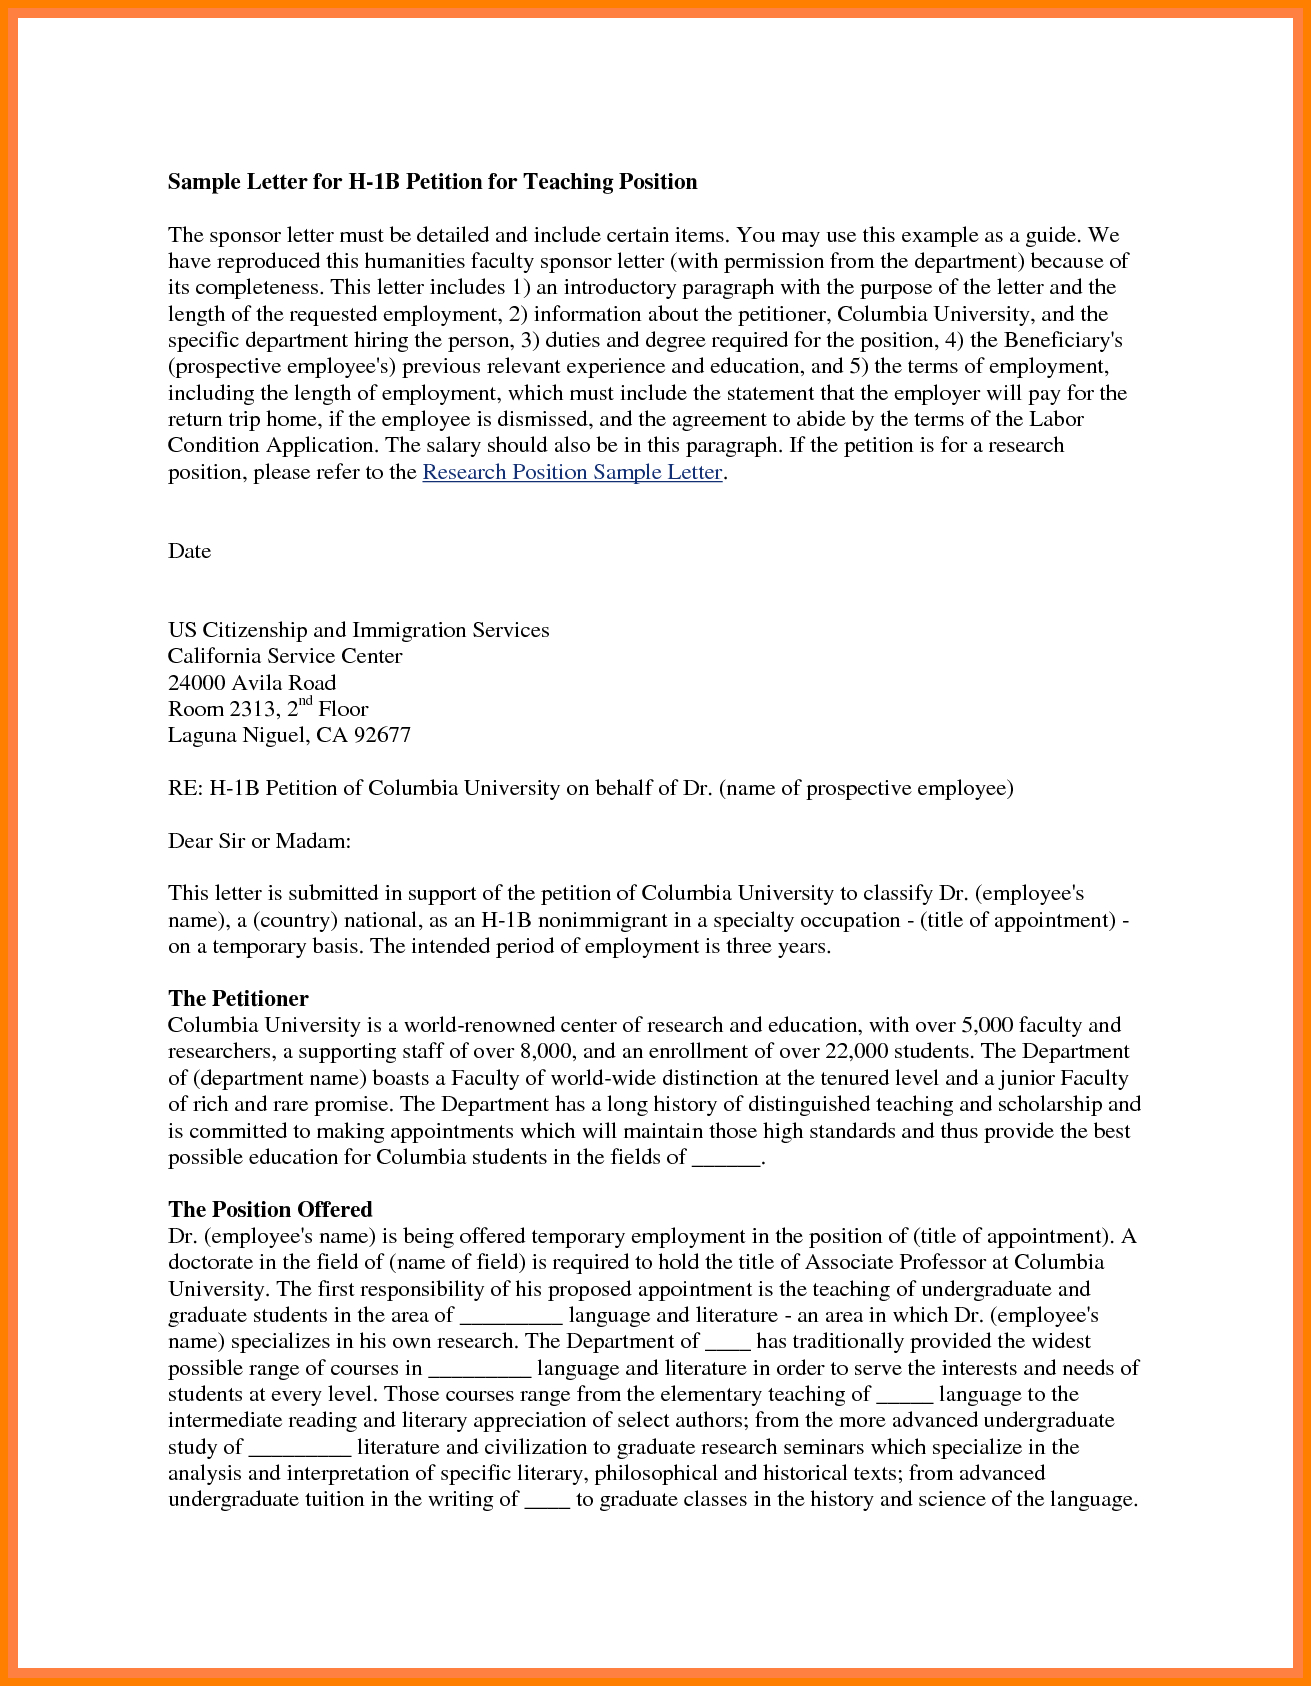 petition letter template example-Examples of petition letters example of petition letter university examples of petition letters example of petition 20-d